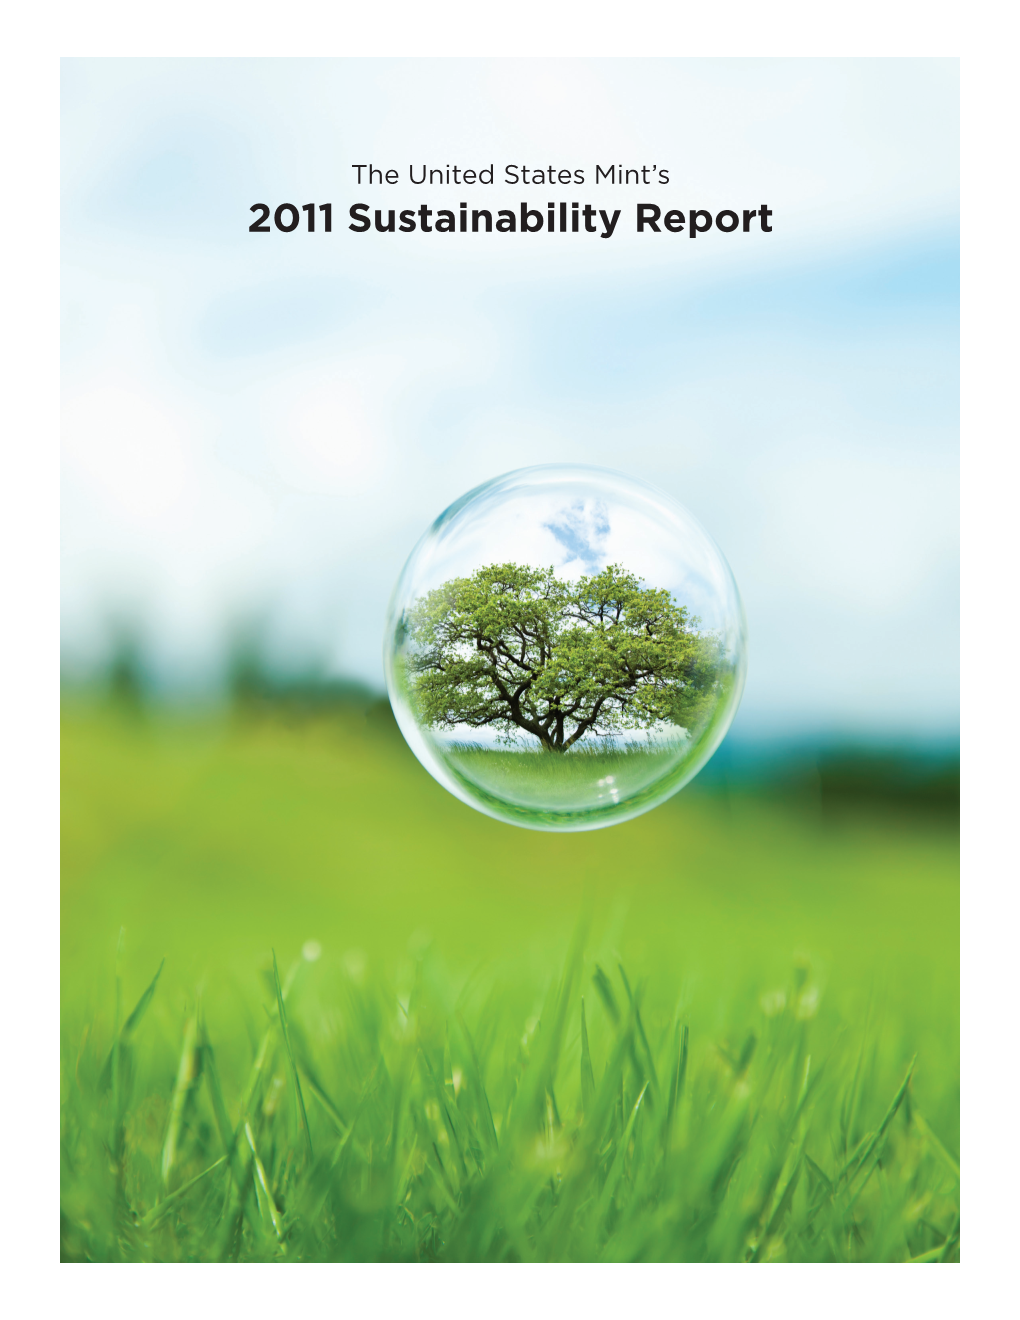 The Mint's 2011 Sustainability Report